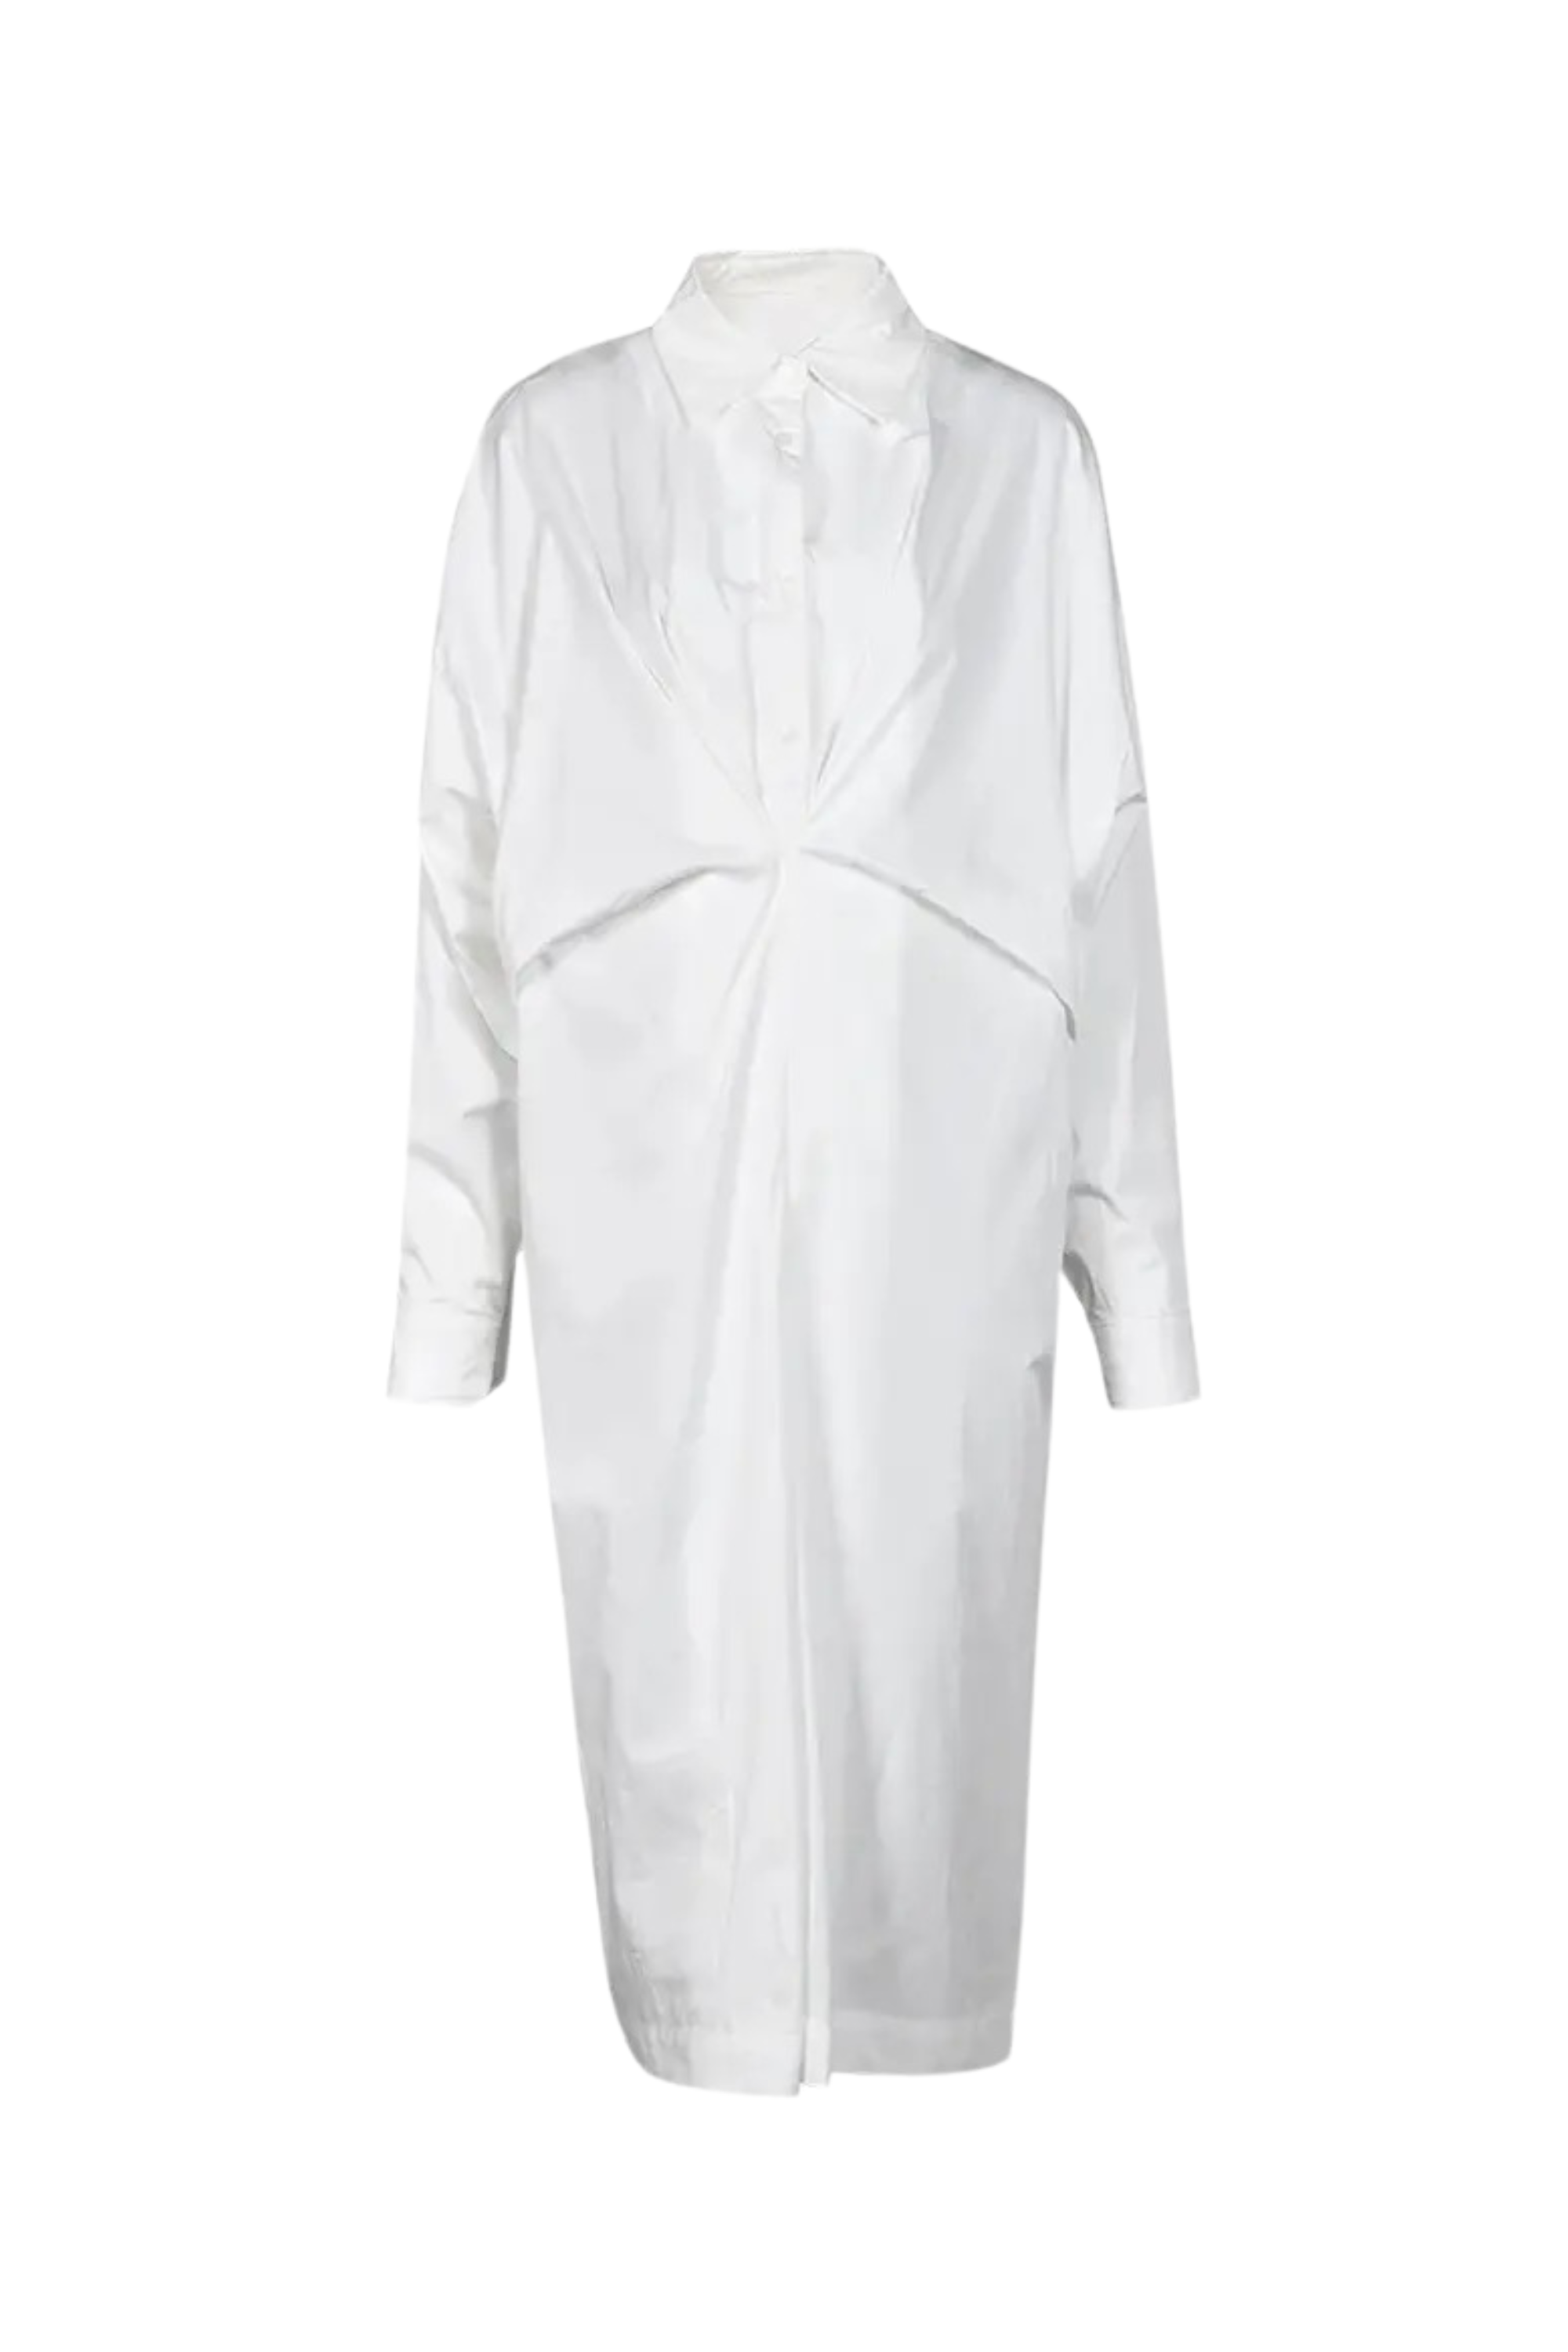 GOLDxTEAL  Relaxed fit white shirt dress.